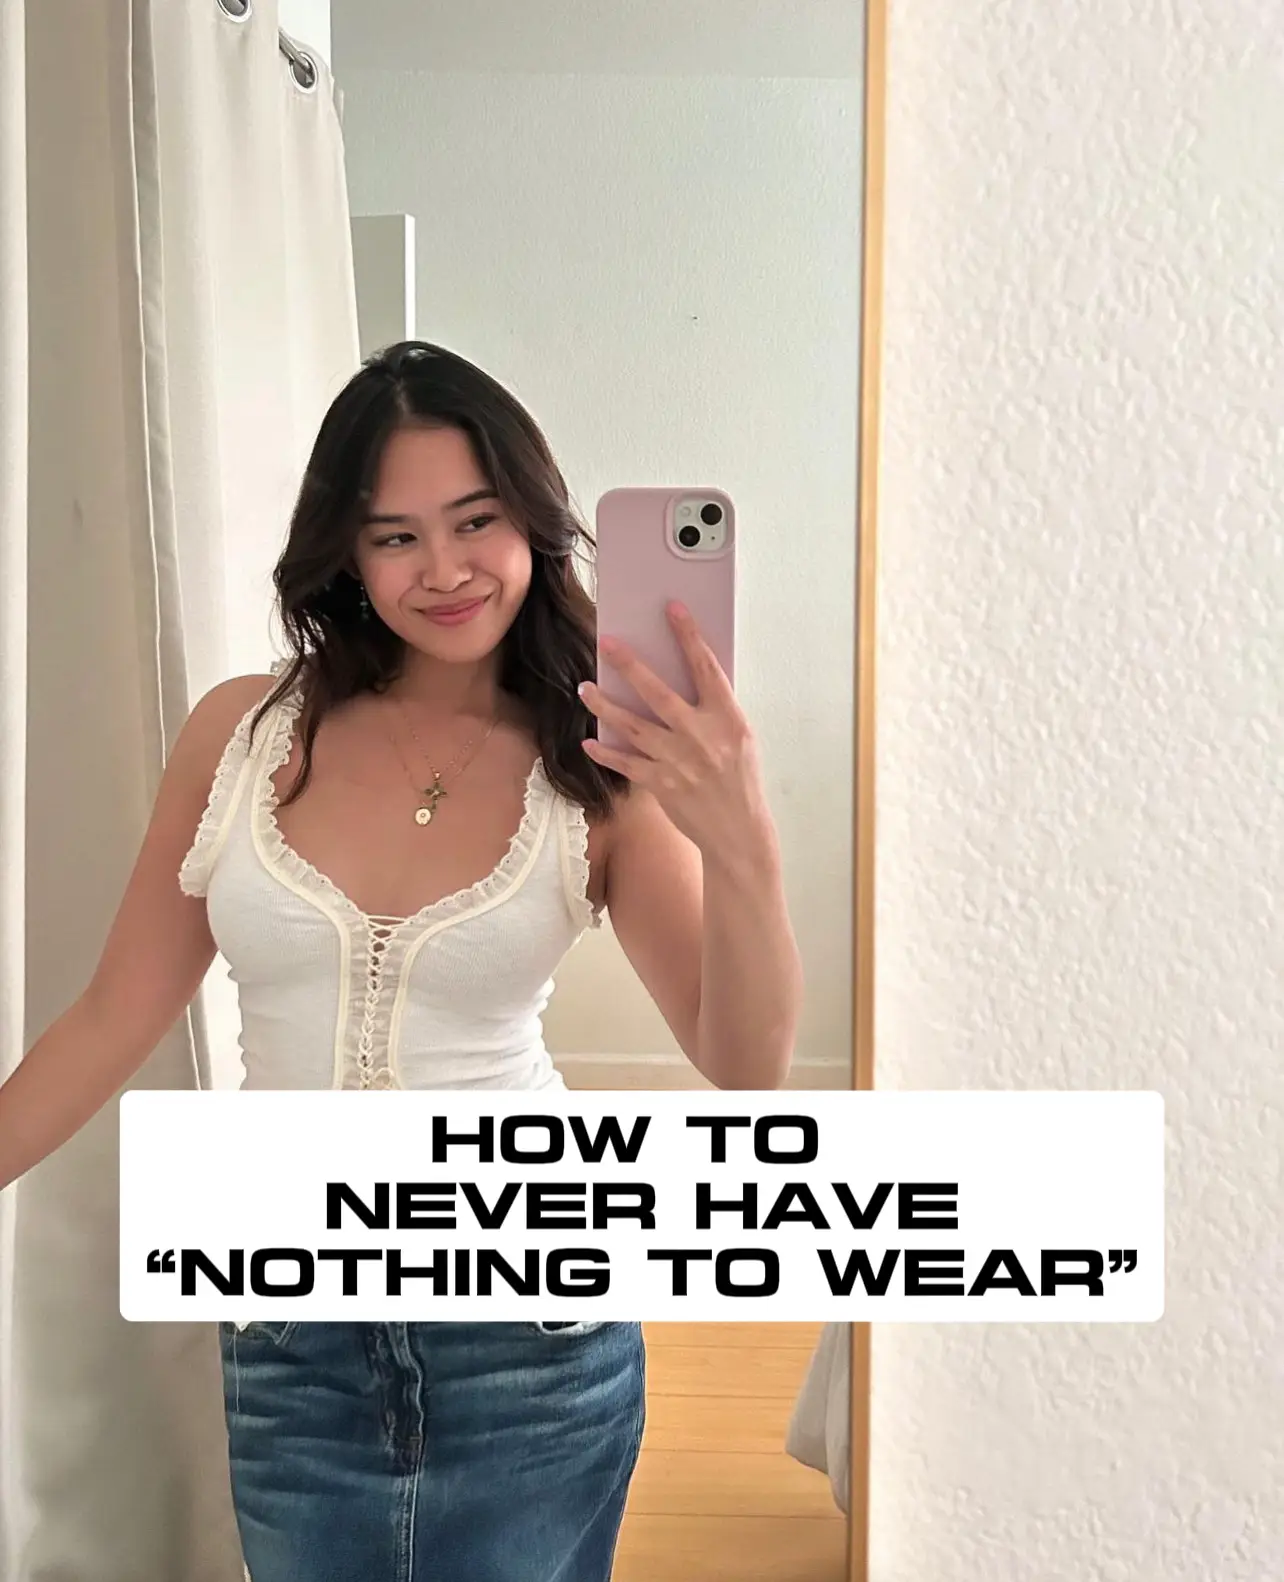 How to never have “nothing to wear”, Gallery posted by Kaitlyn